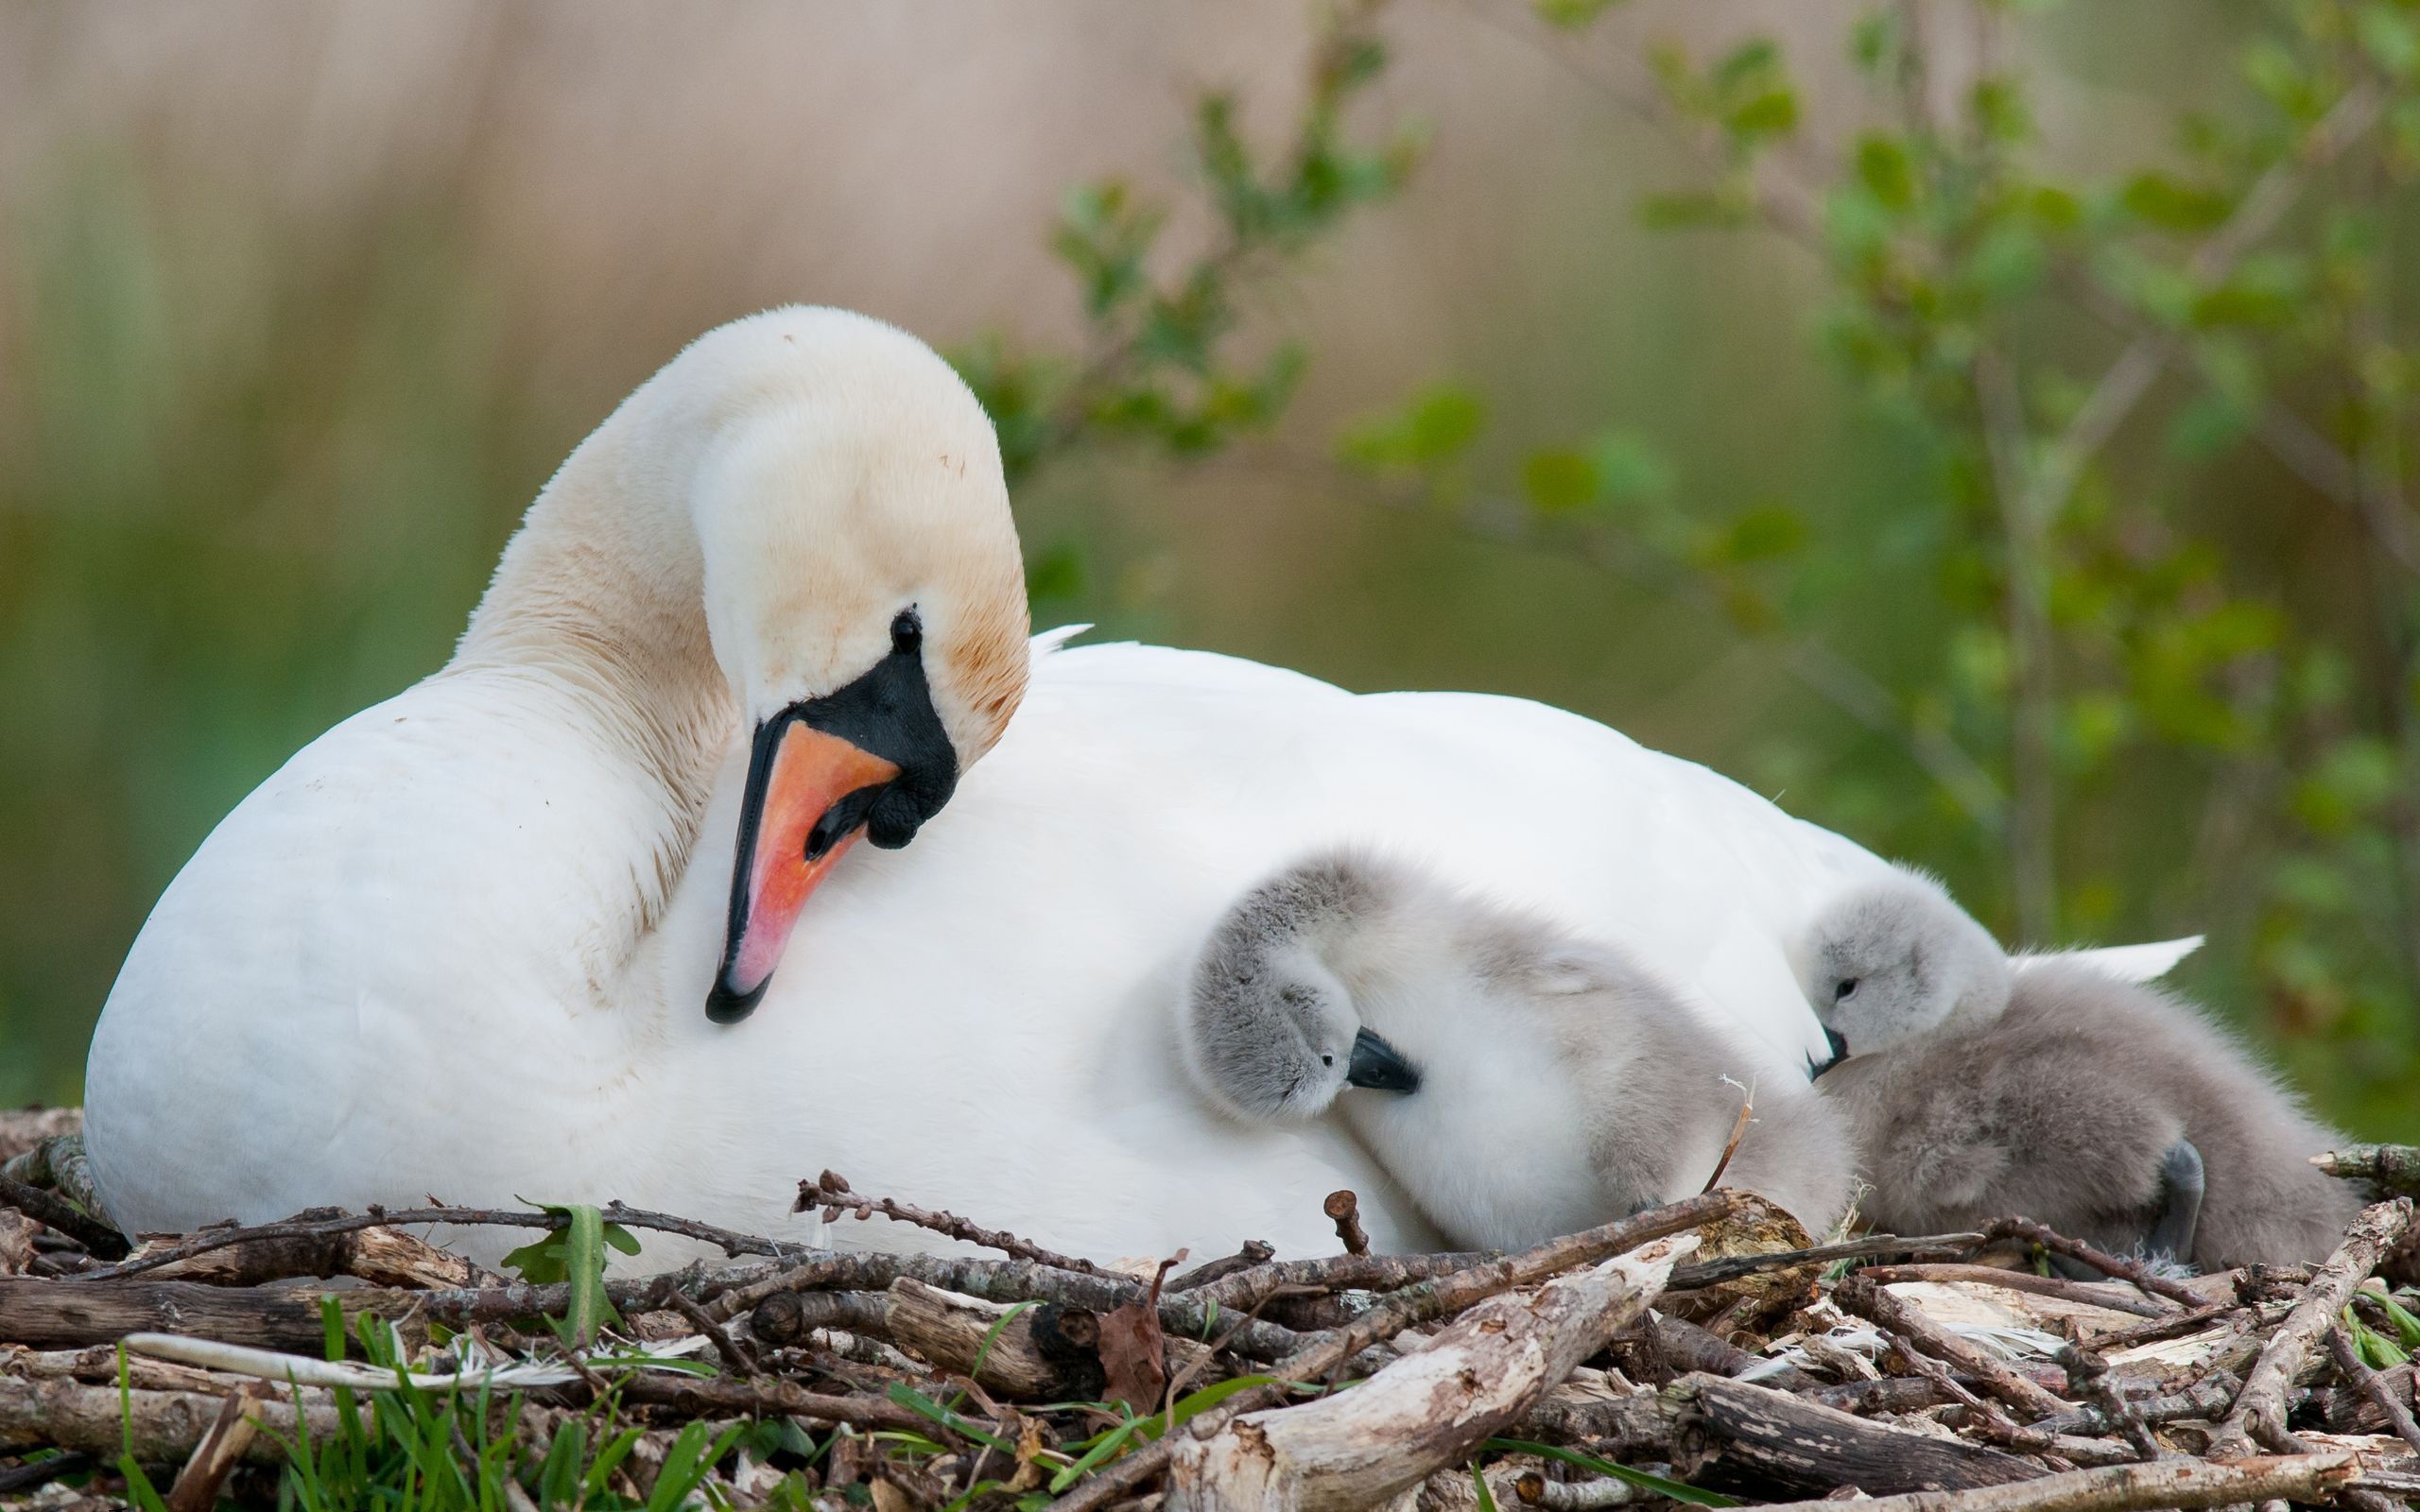 Swan with Chicks